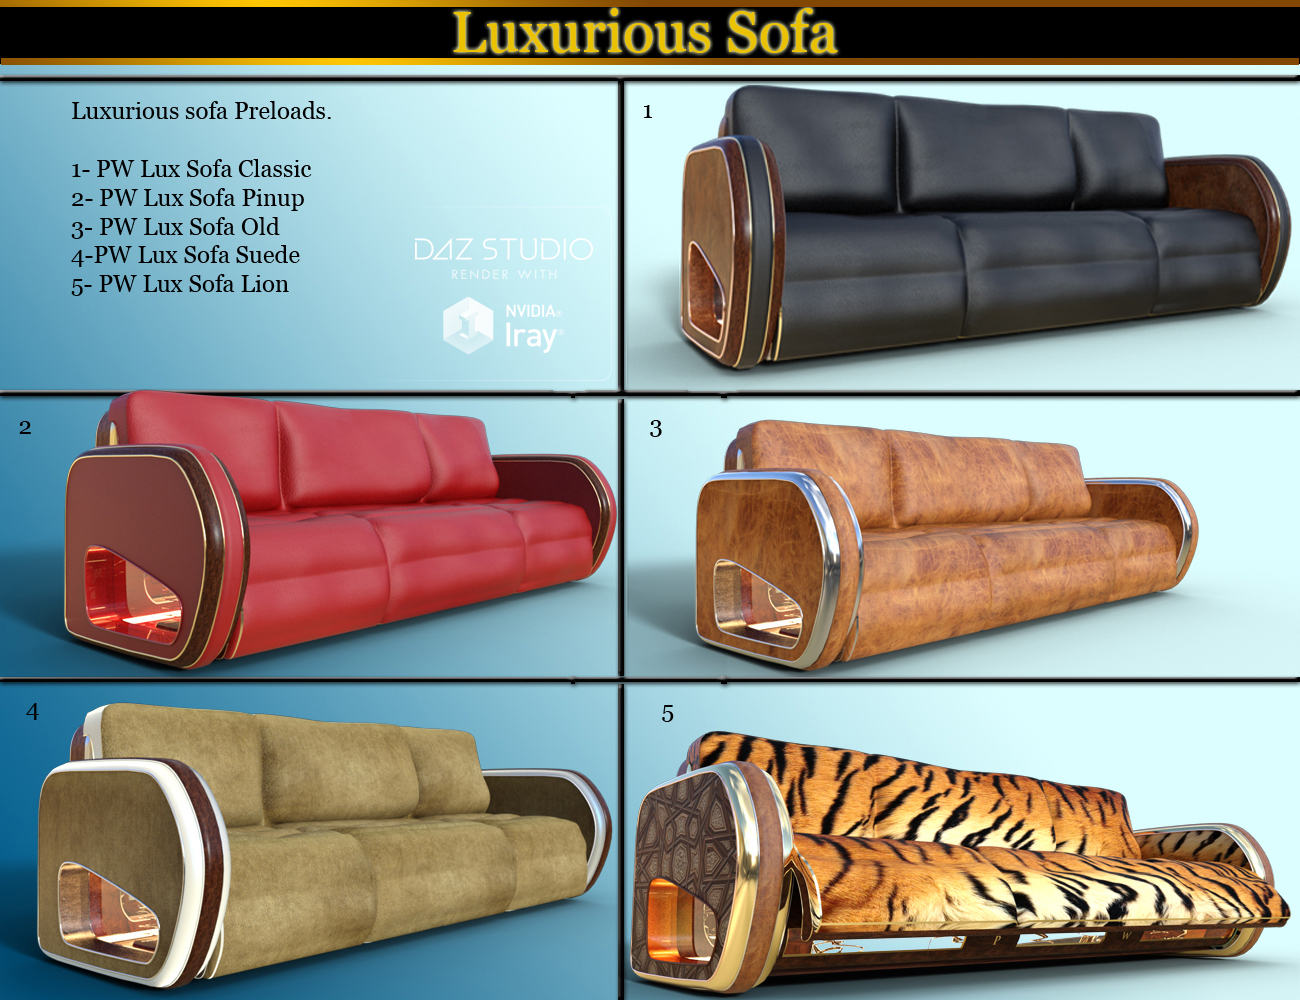 Luxurious Chair and Sofa by: PW Productions, 3D Models by Daz 3D